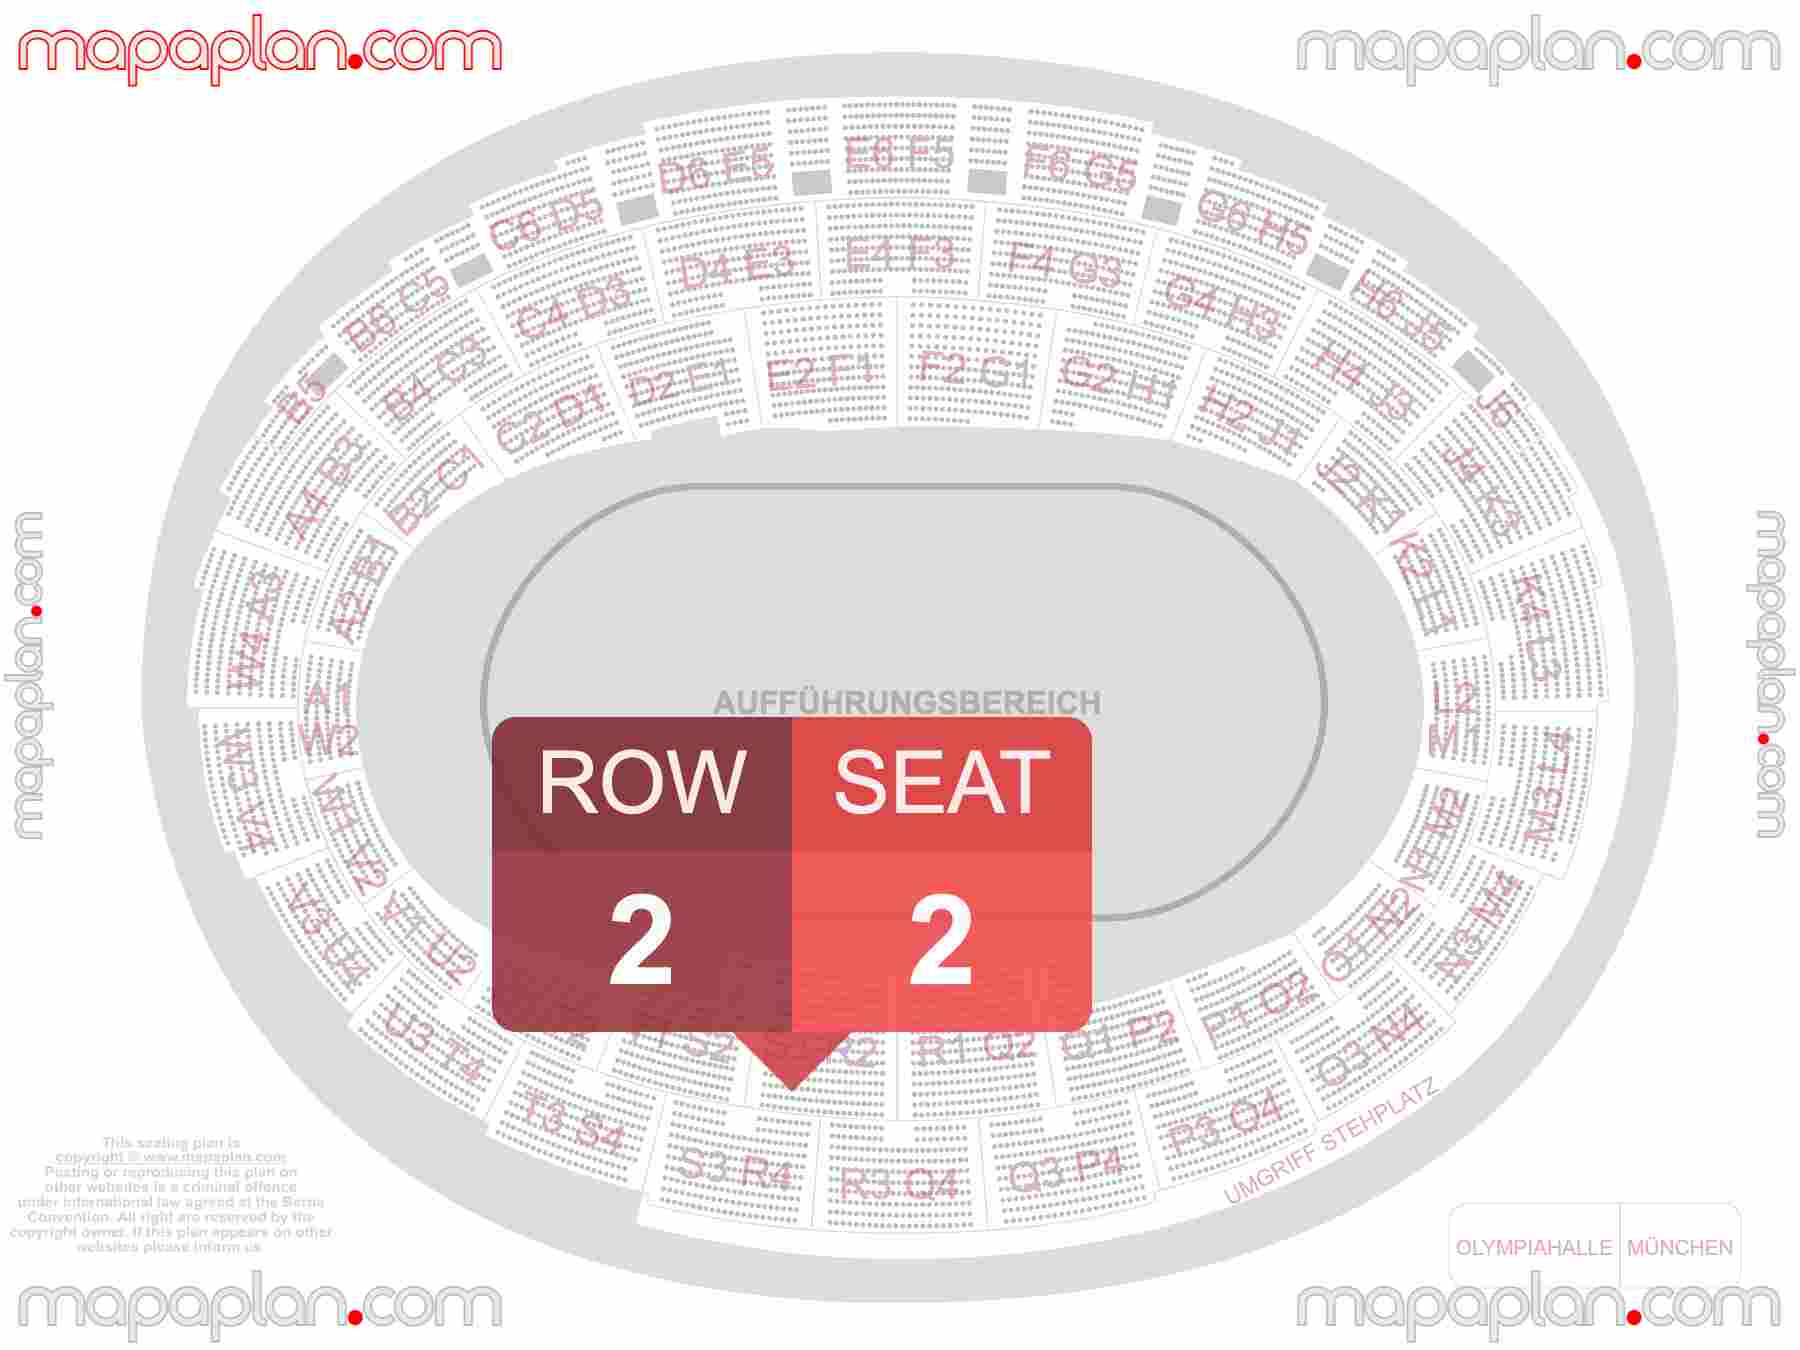 Munich Olympiahalle seating plan Full floor performance Night of the Jumps show find best seats row numbering system map showing how many seats per row - Individual find my seat virtual locator